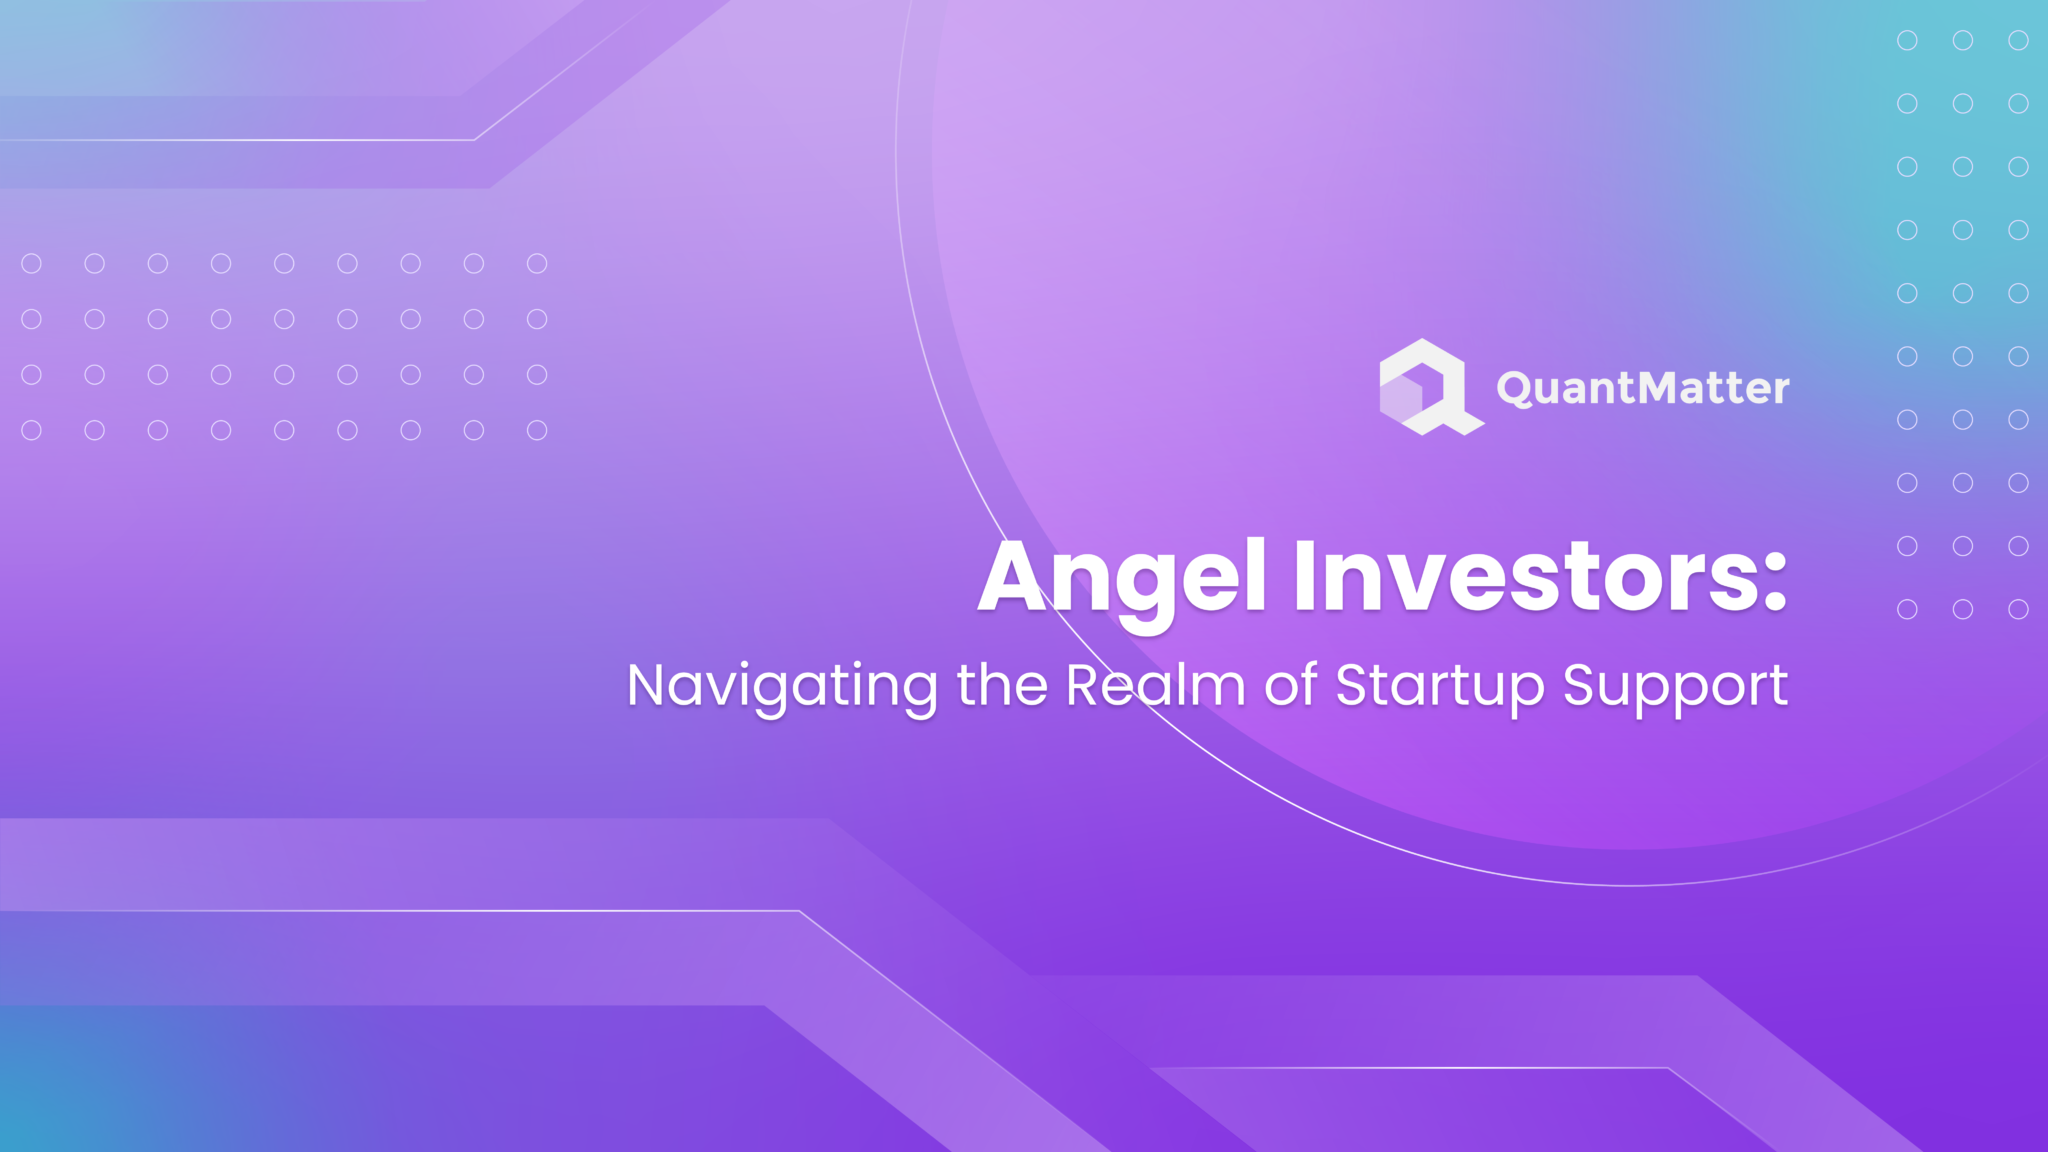 What Are Angel Investor Considerations for Entrepreneurs?